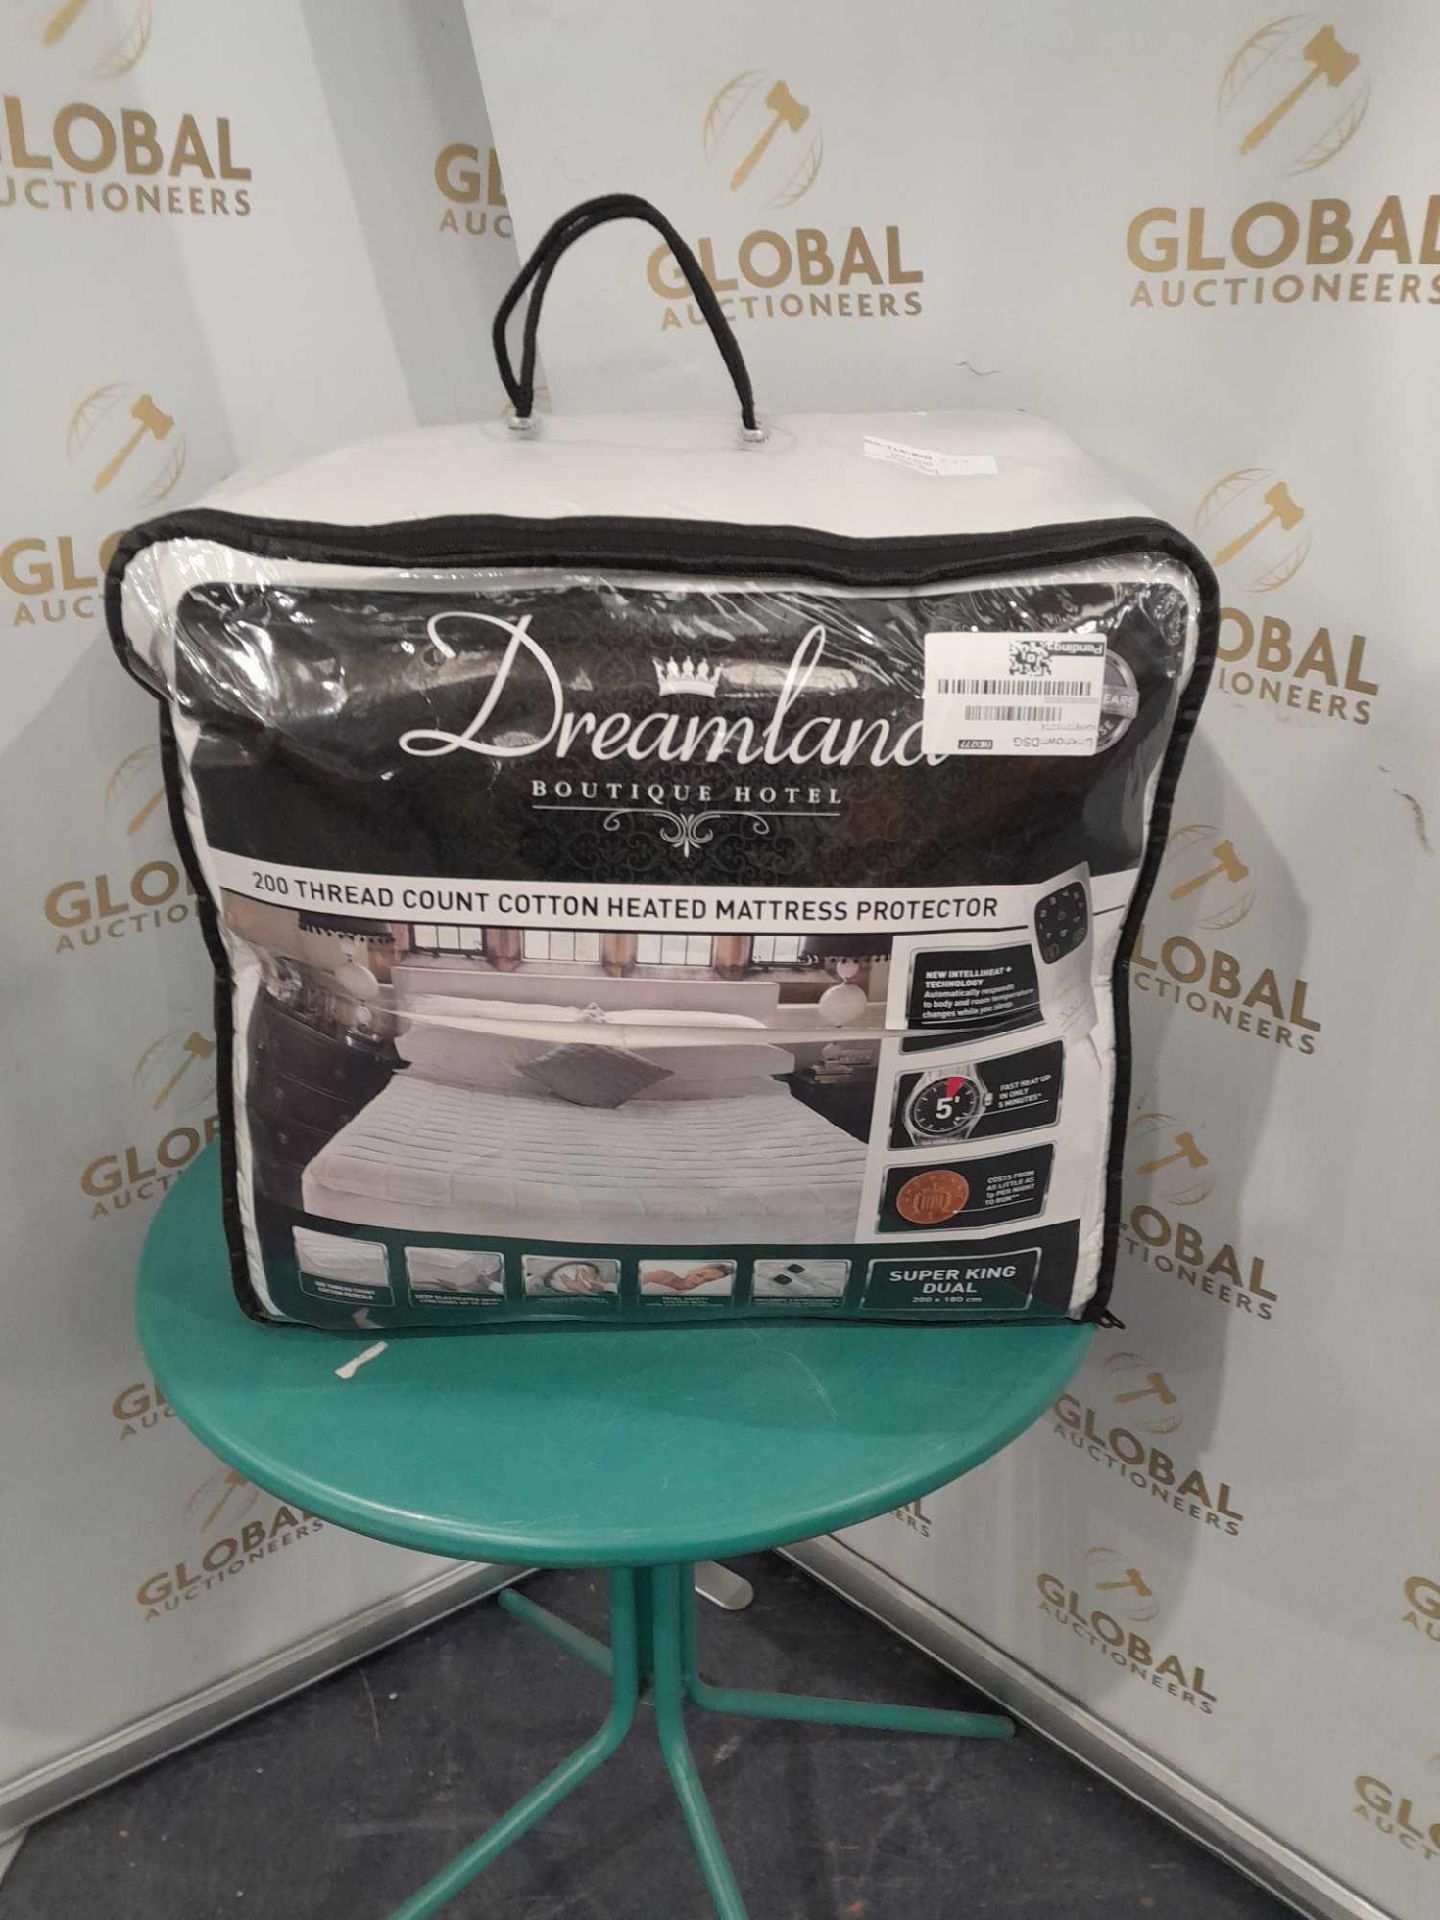 RRP £115 Bagged Dreamland Boutique Hotel 200X150Cm 200 Thread Count Cotton Heated Mattress Protector - Image 2 of 2